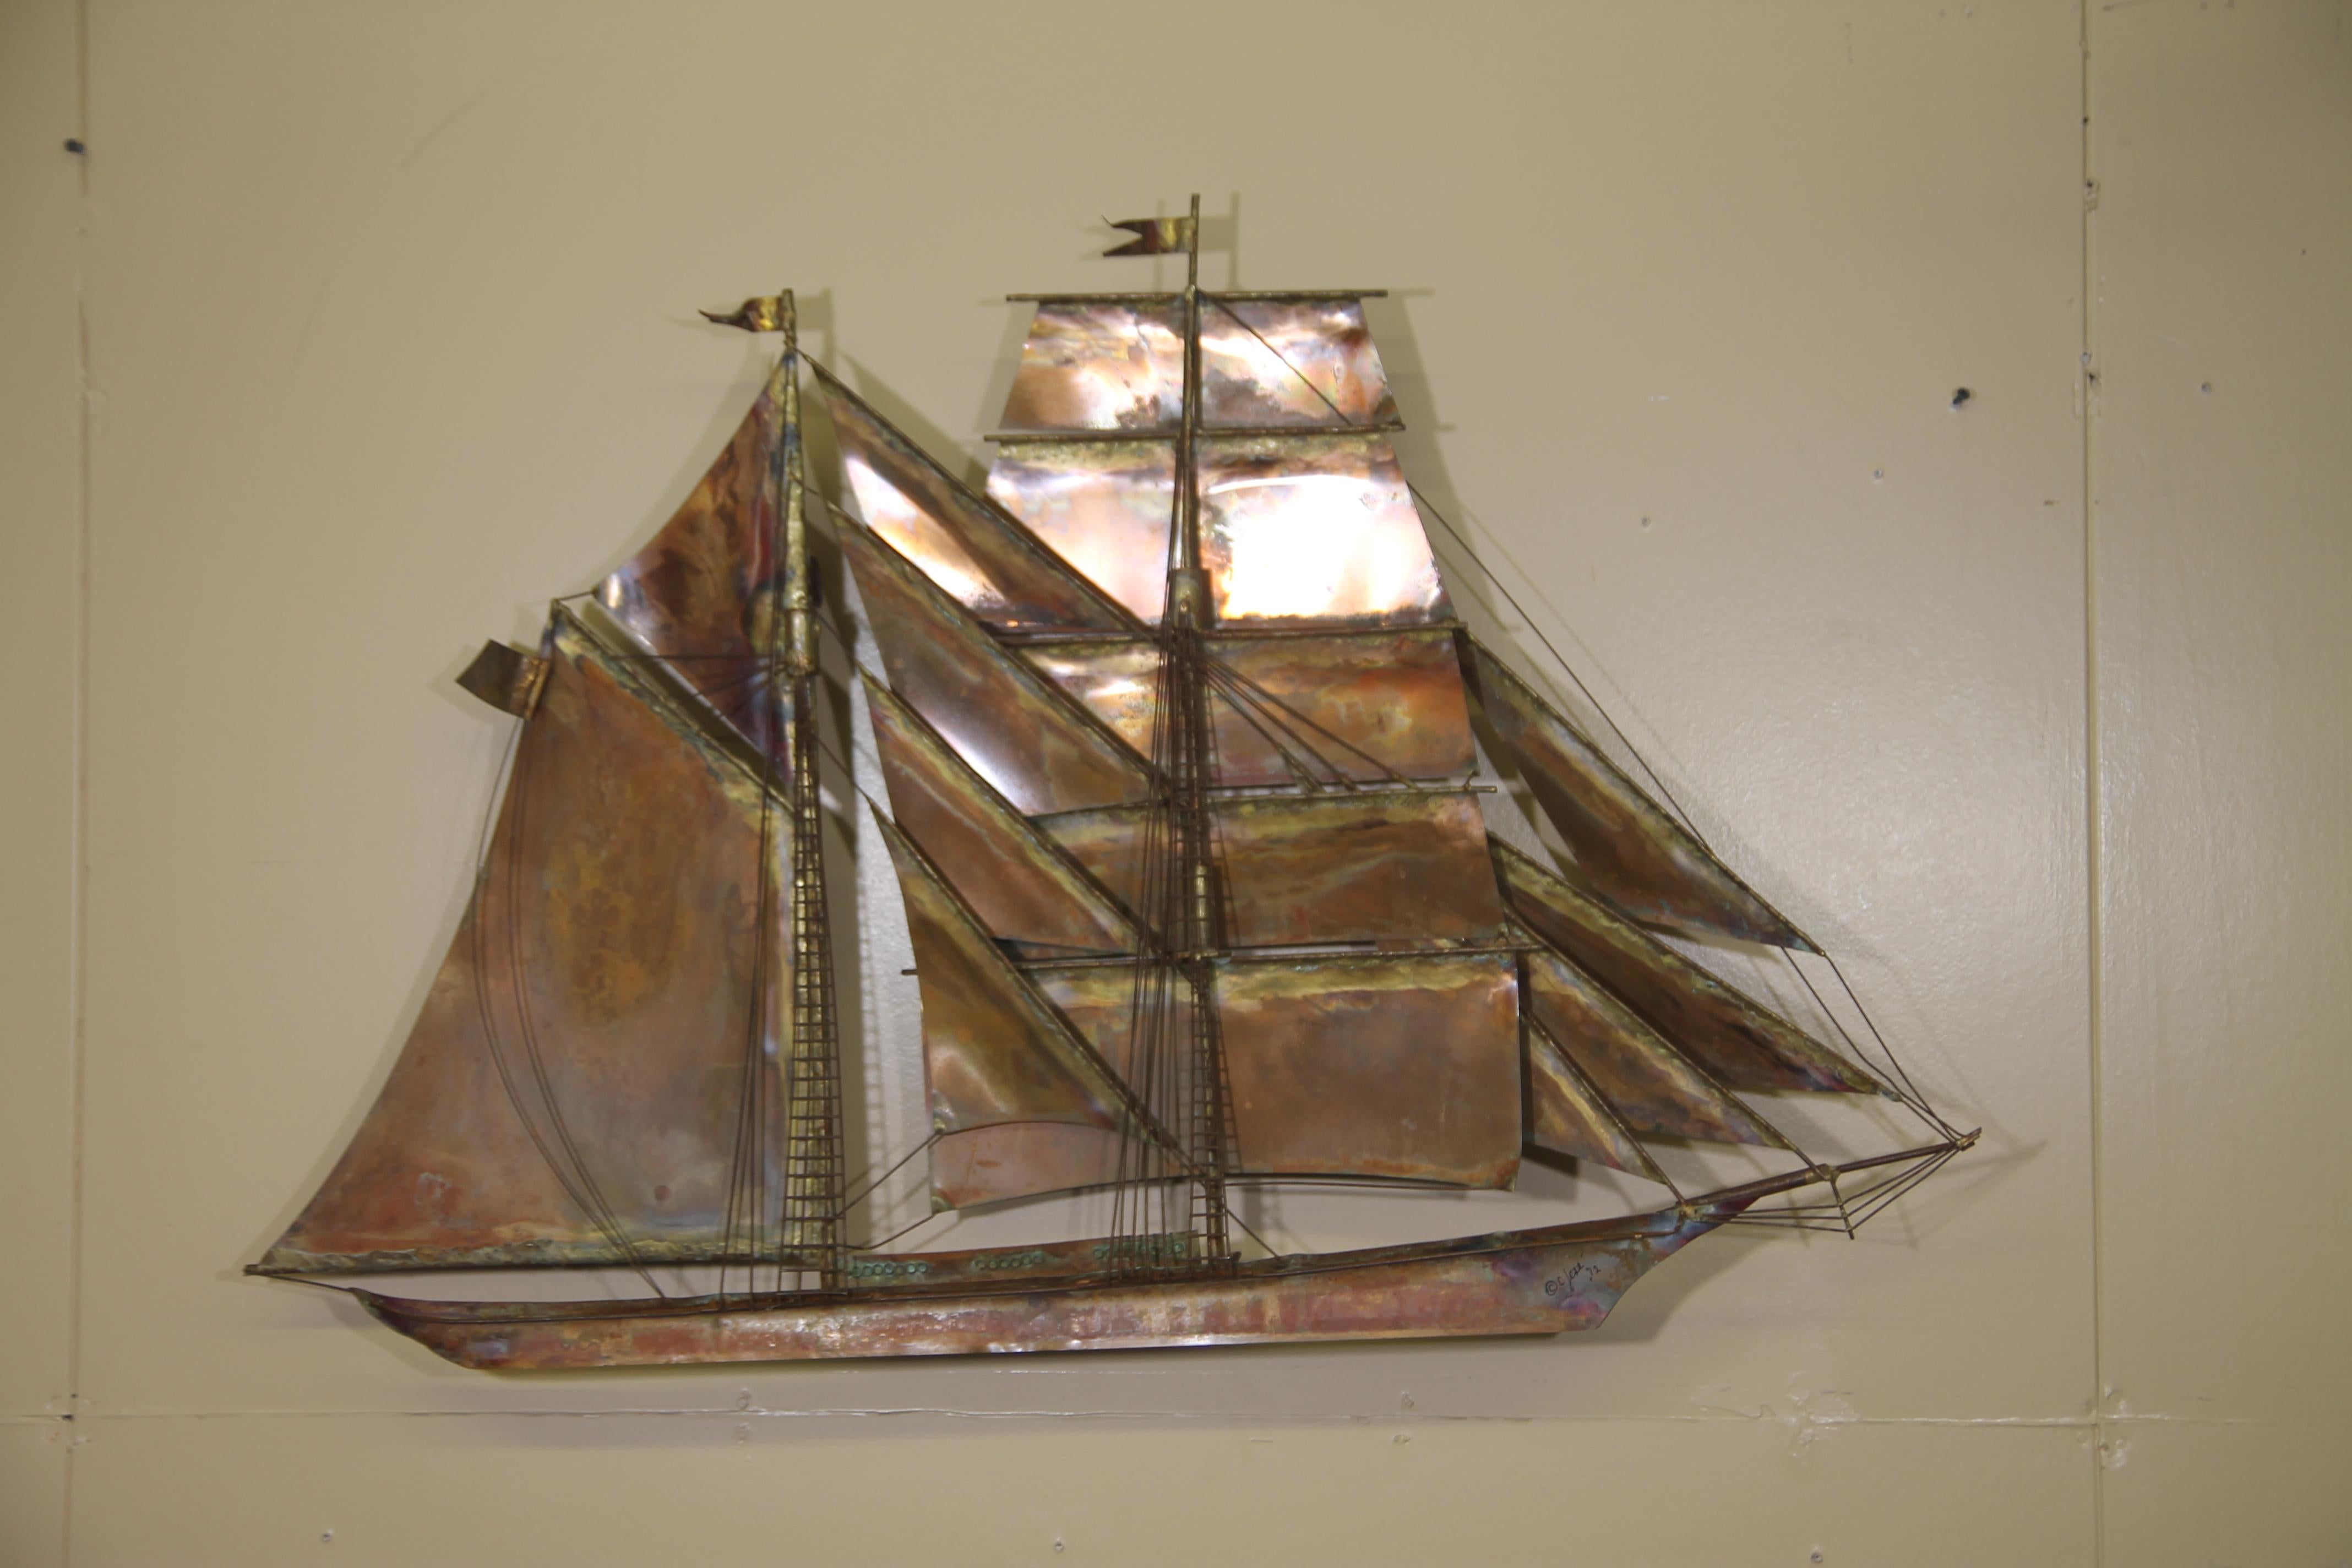 Great copper sailing ship by Curtis Jere dated and signed 1972. This large wall art has wonderful detail. Will look wonderful in any decor.